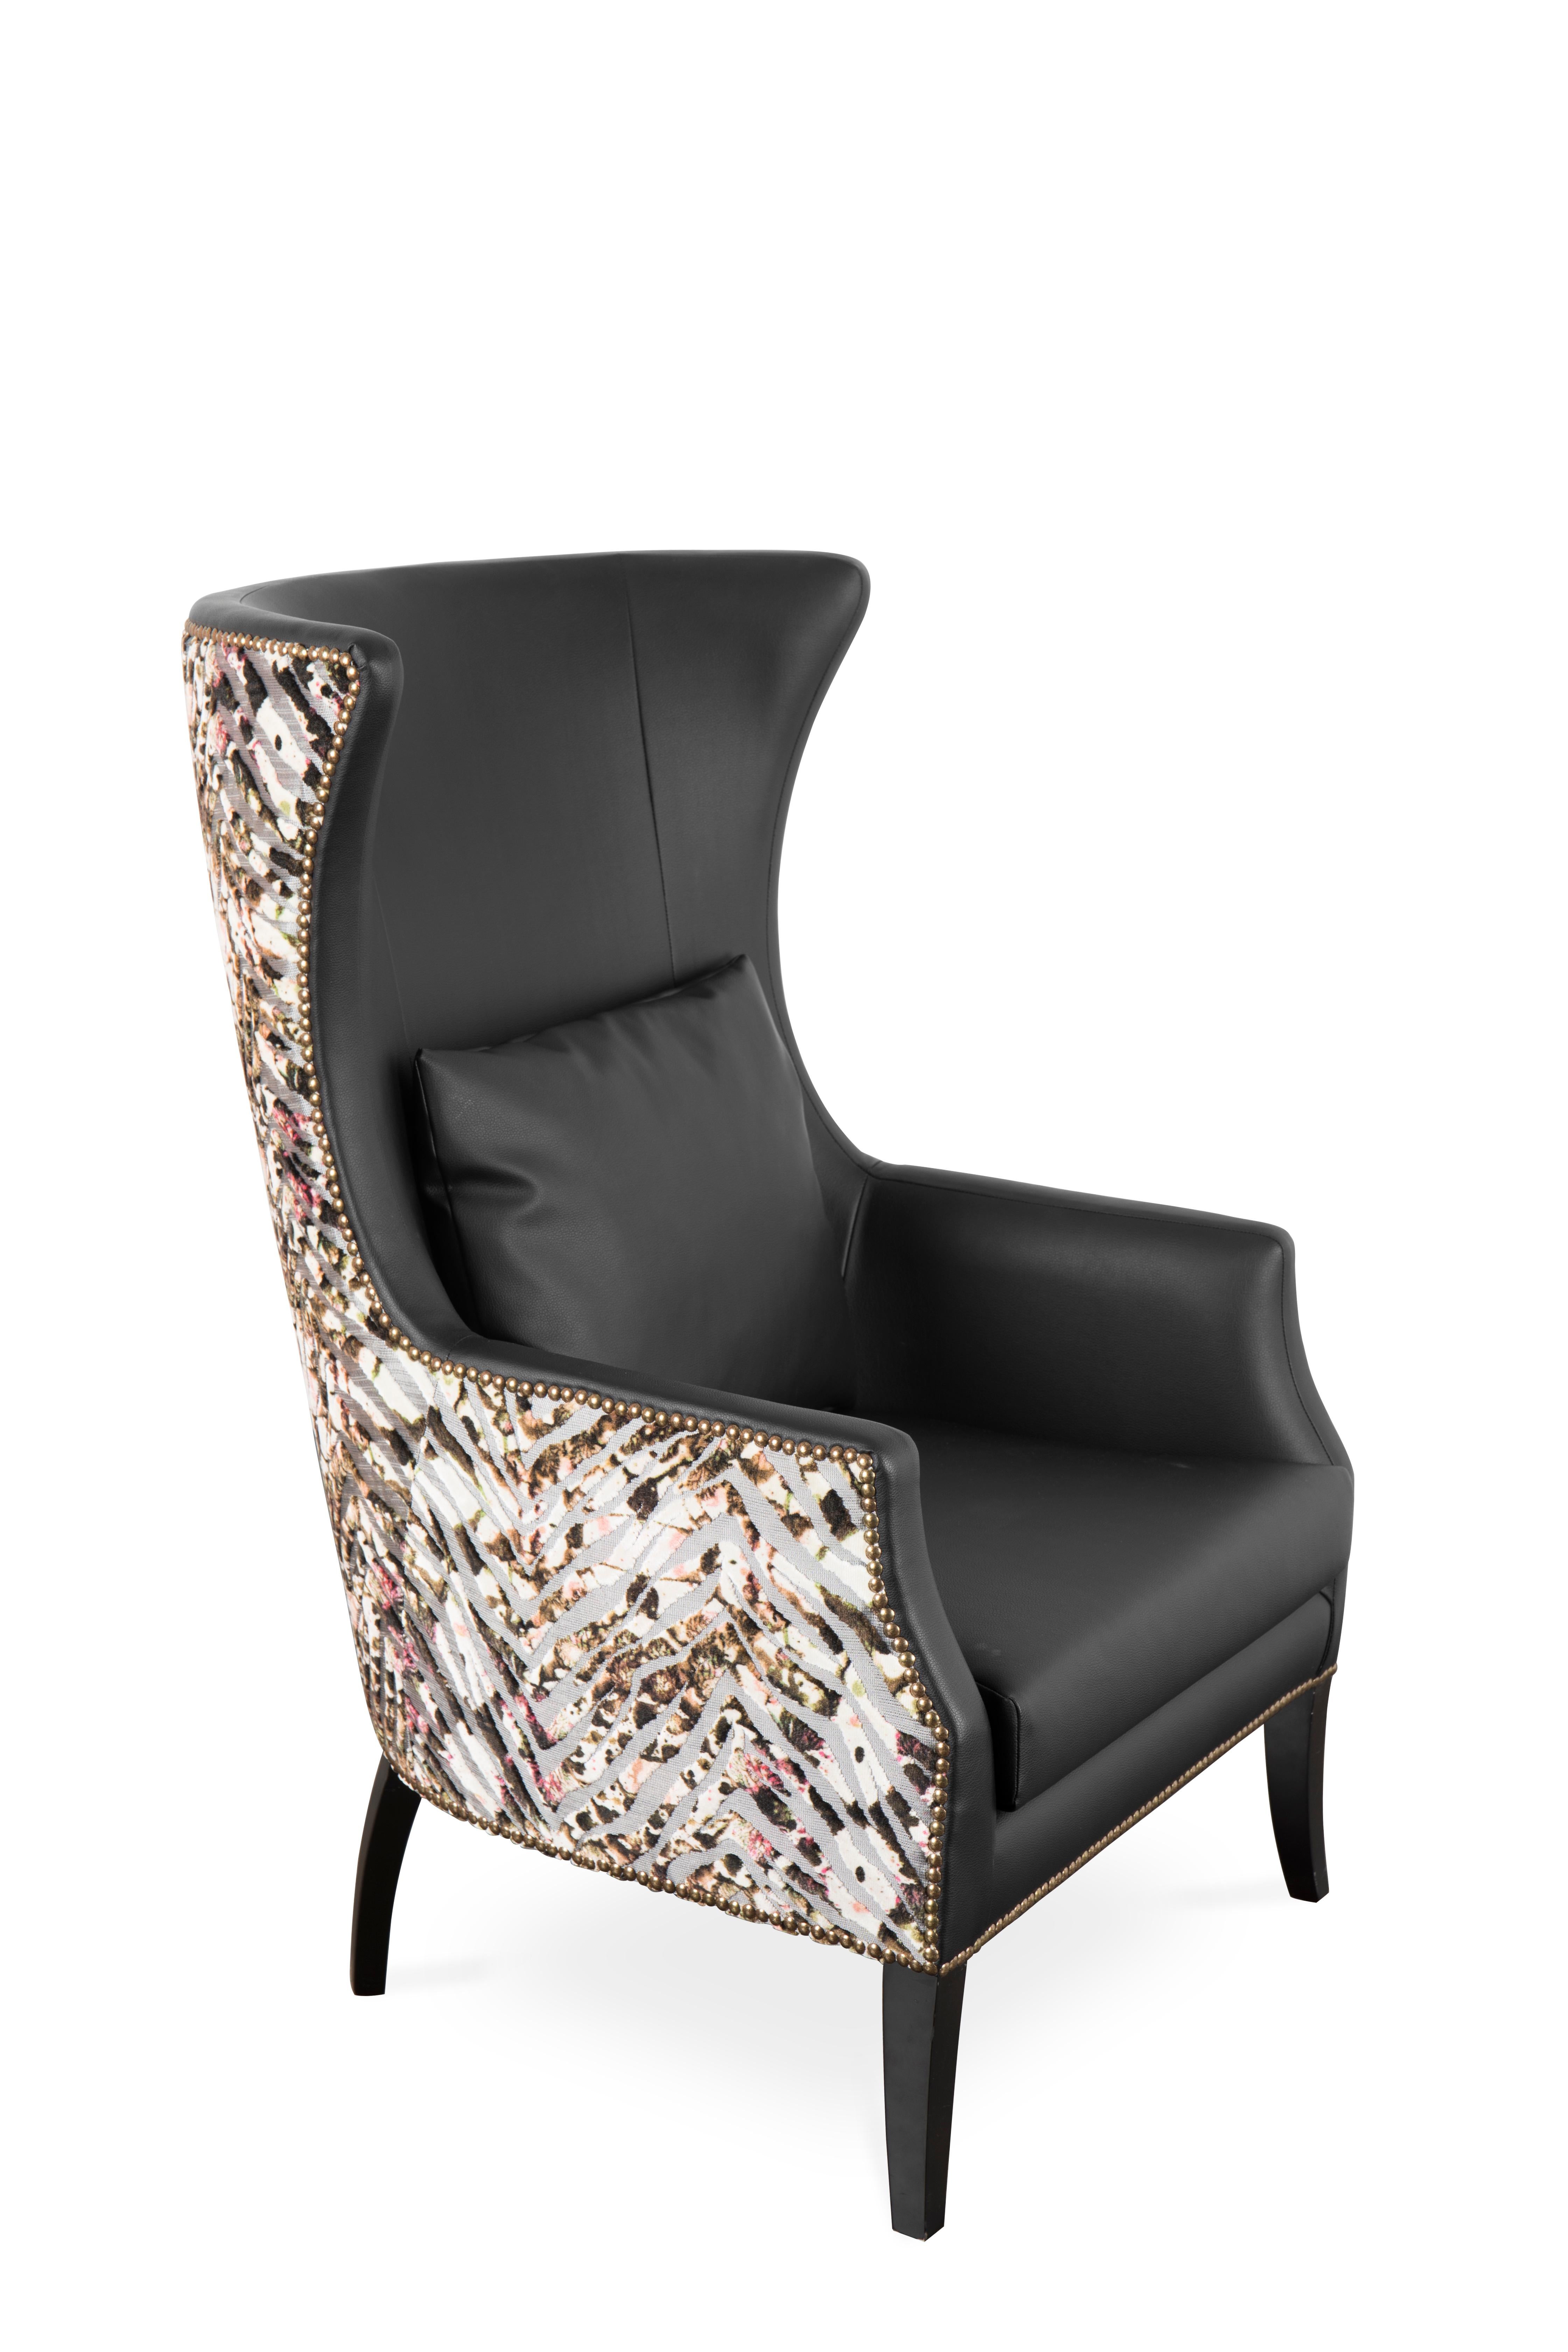 Dukono Armchair in Faux Leather With Aged Gold Nails For Sale 1